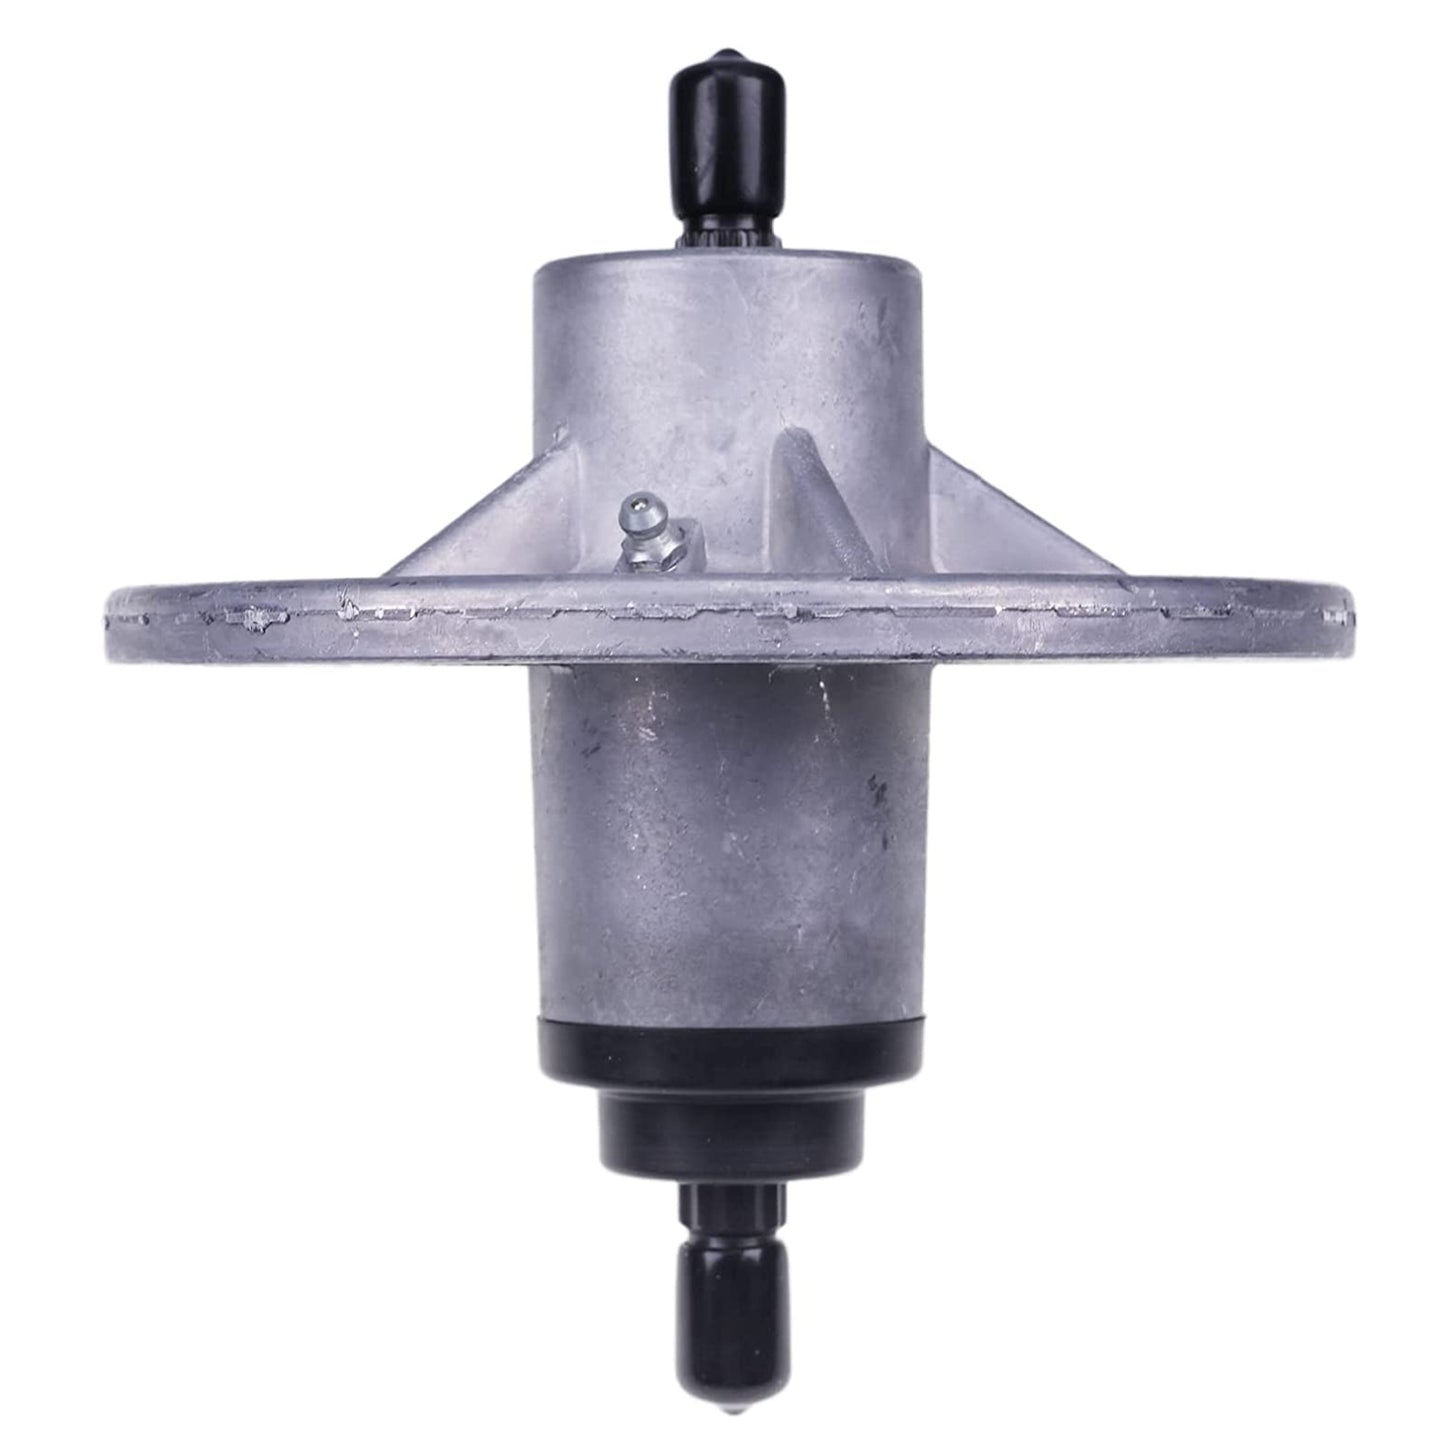 Spindle Assembly Compatible with Murray 492524 1001046 for 38" 40" 42" 46" Decks